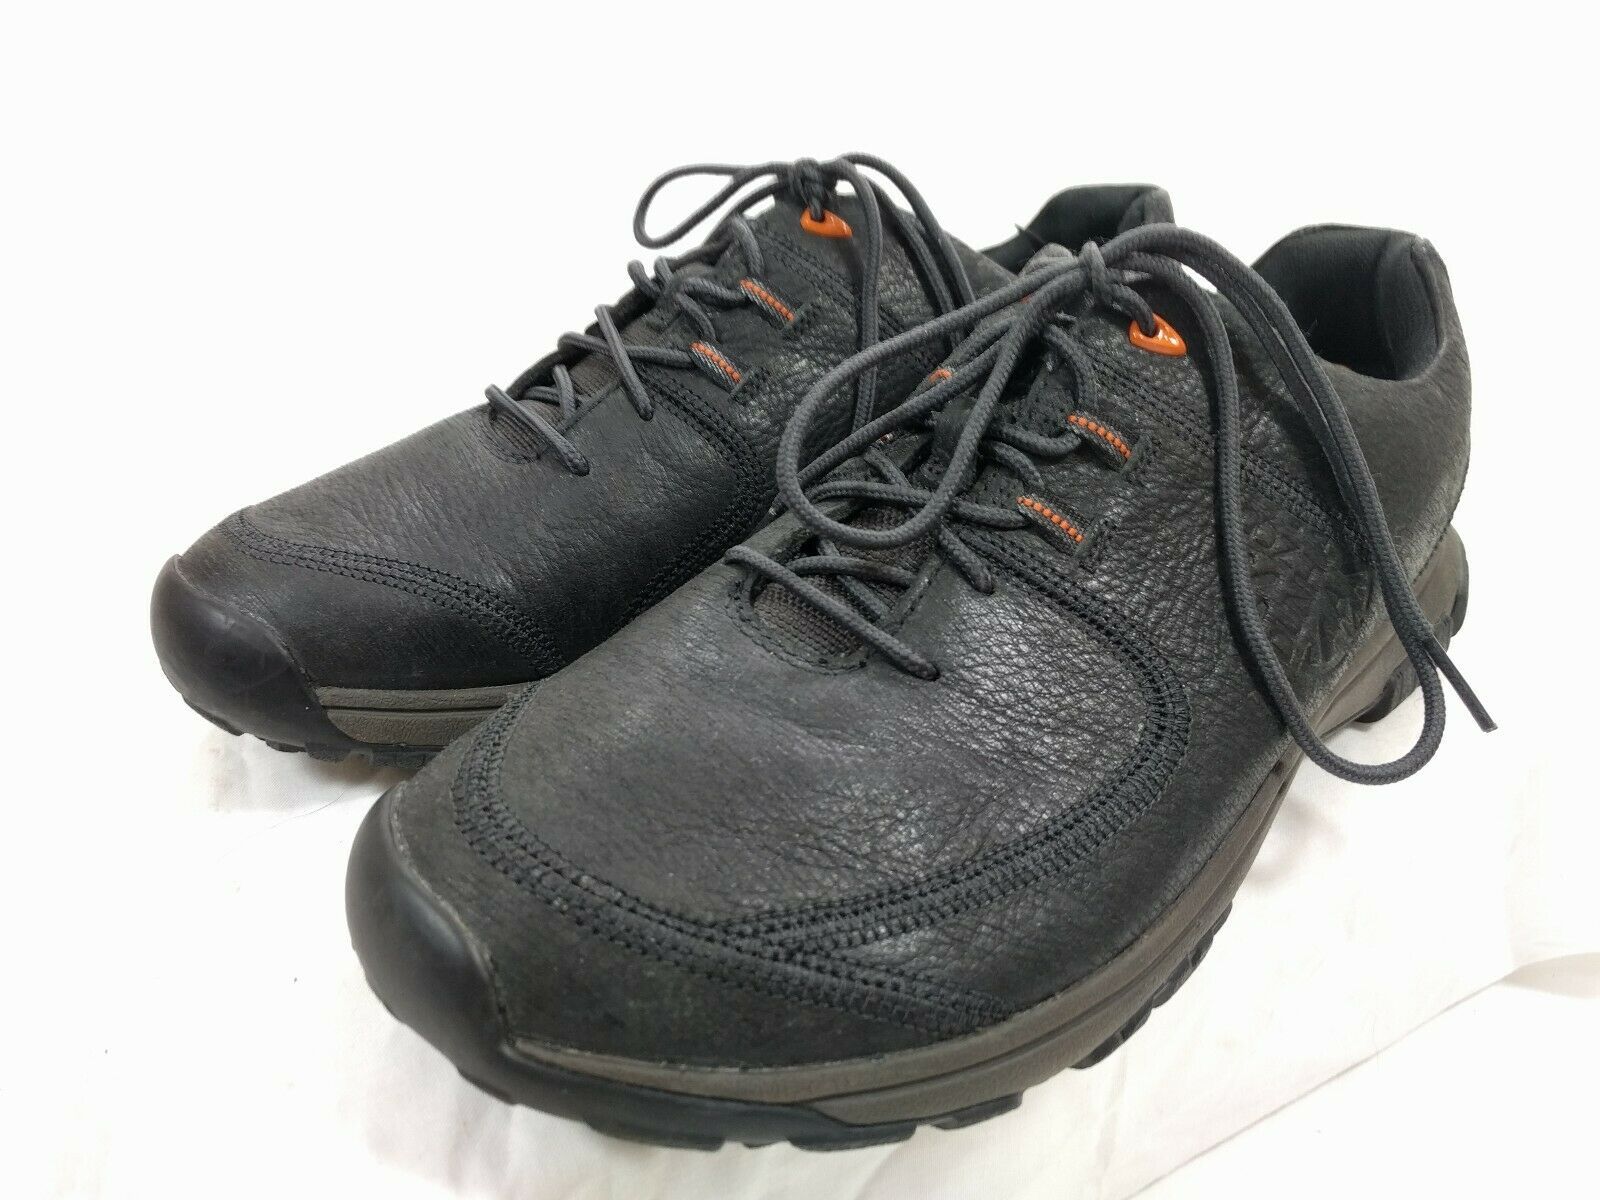 Dunham Mens Mitchell Black Lace Up  Leather Sneakers Shoes DAD01CH Sz 8.5 EE  - $32.67